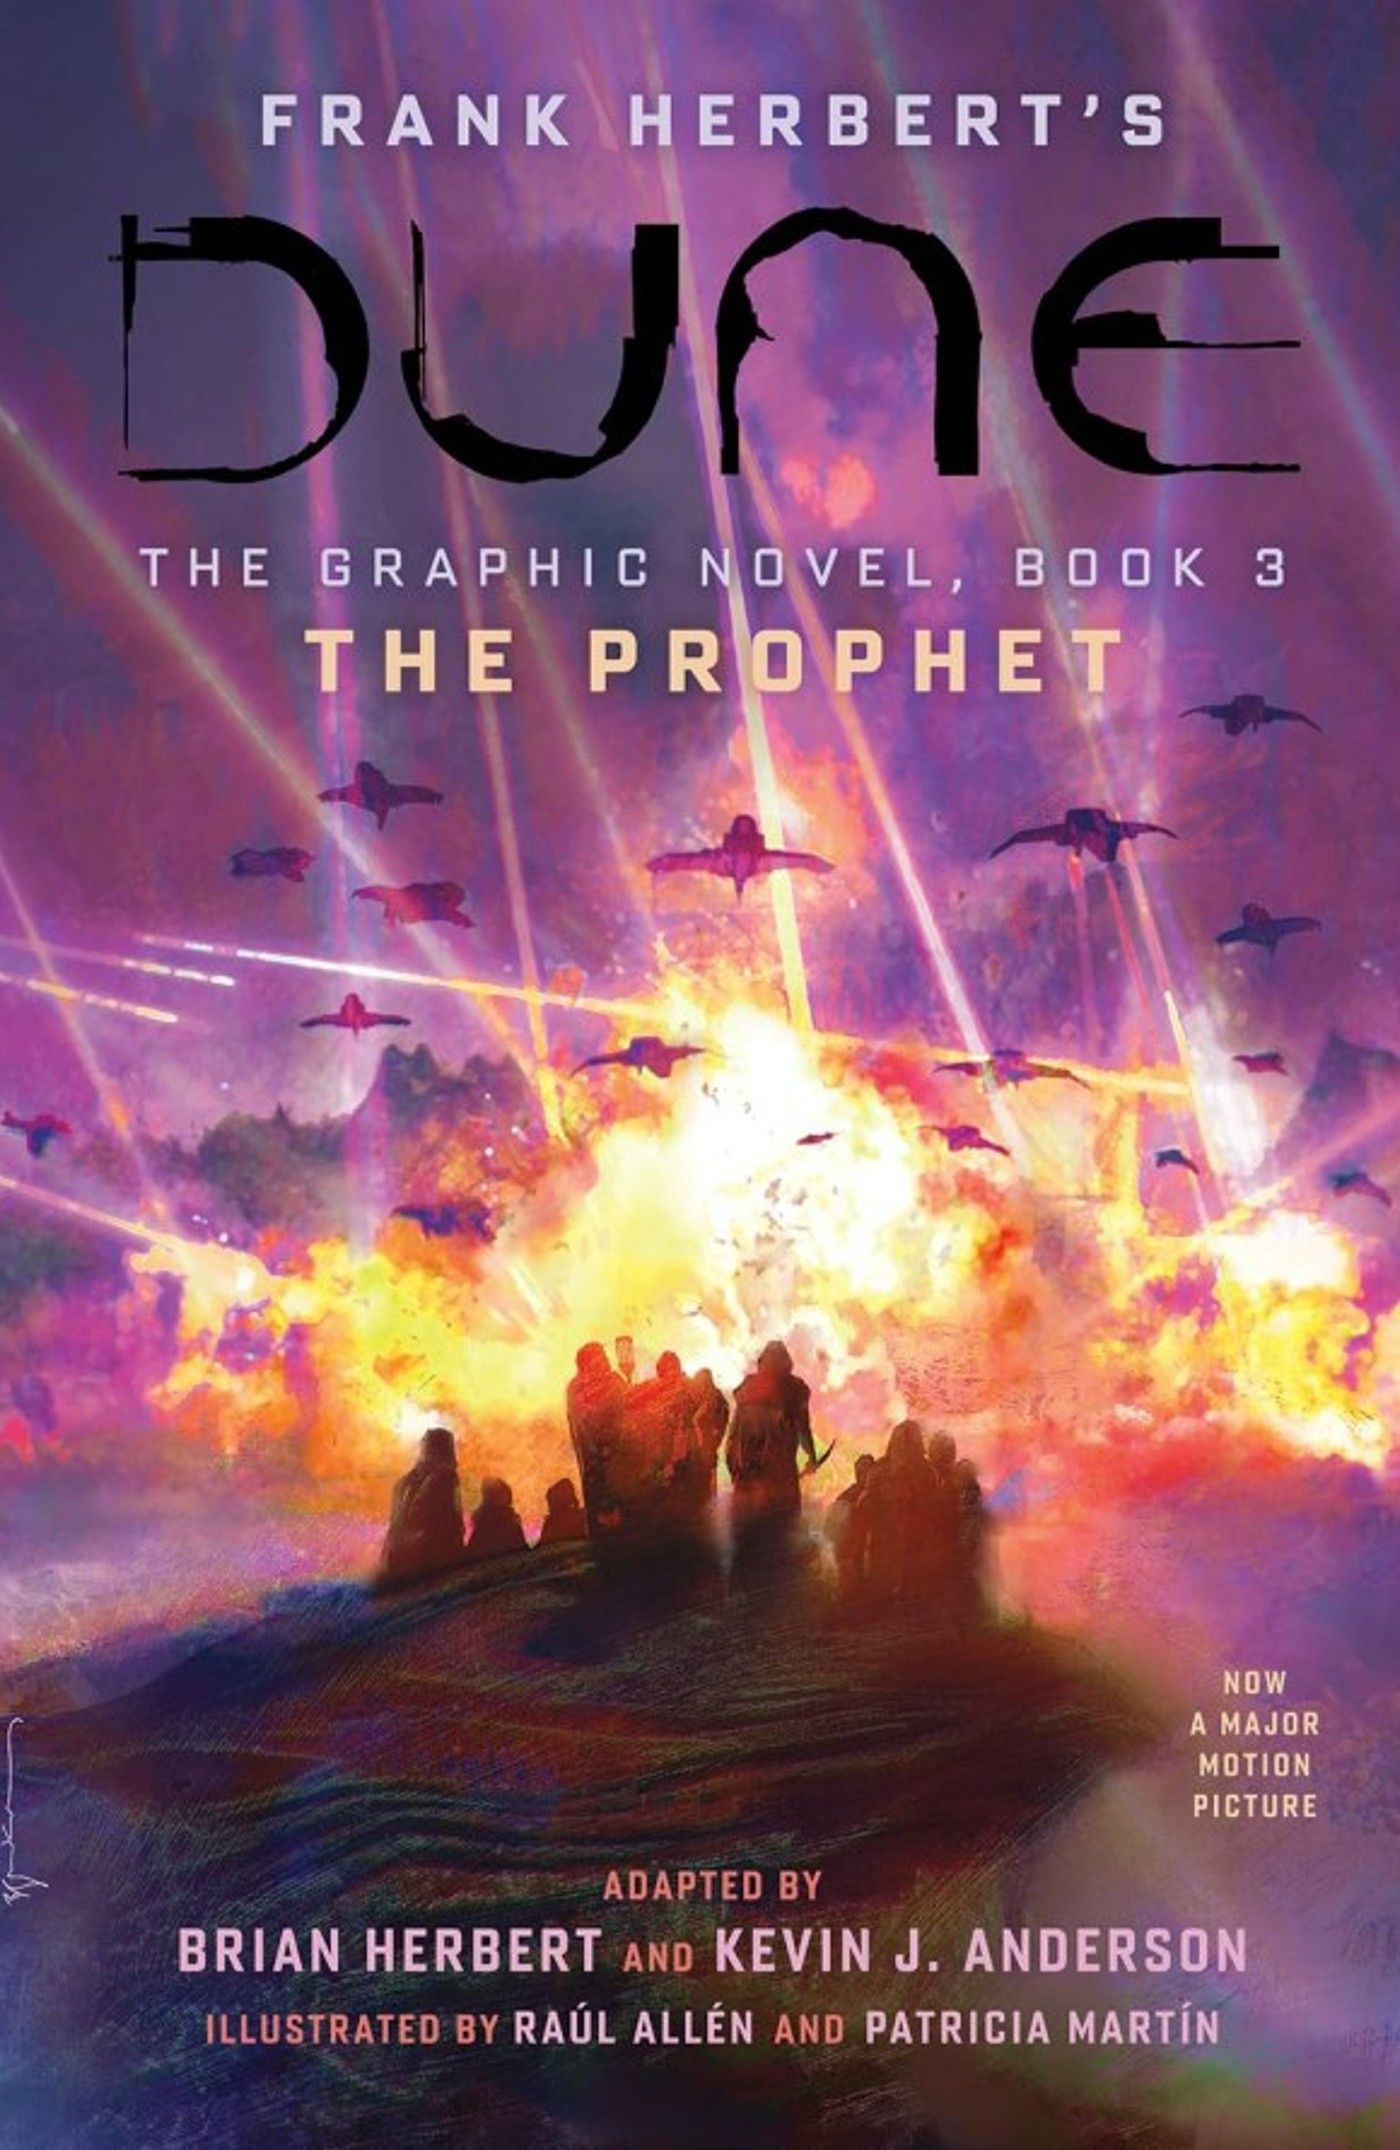 Dune Volume 3 Cover featuring people gathered watching a purple sky and explosions on the horizon